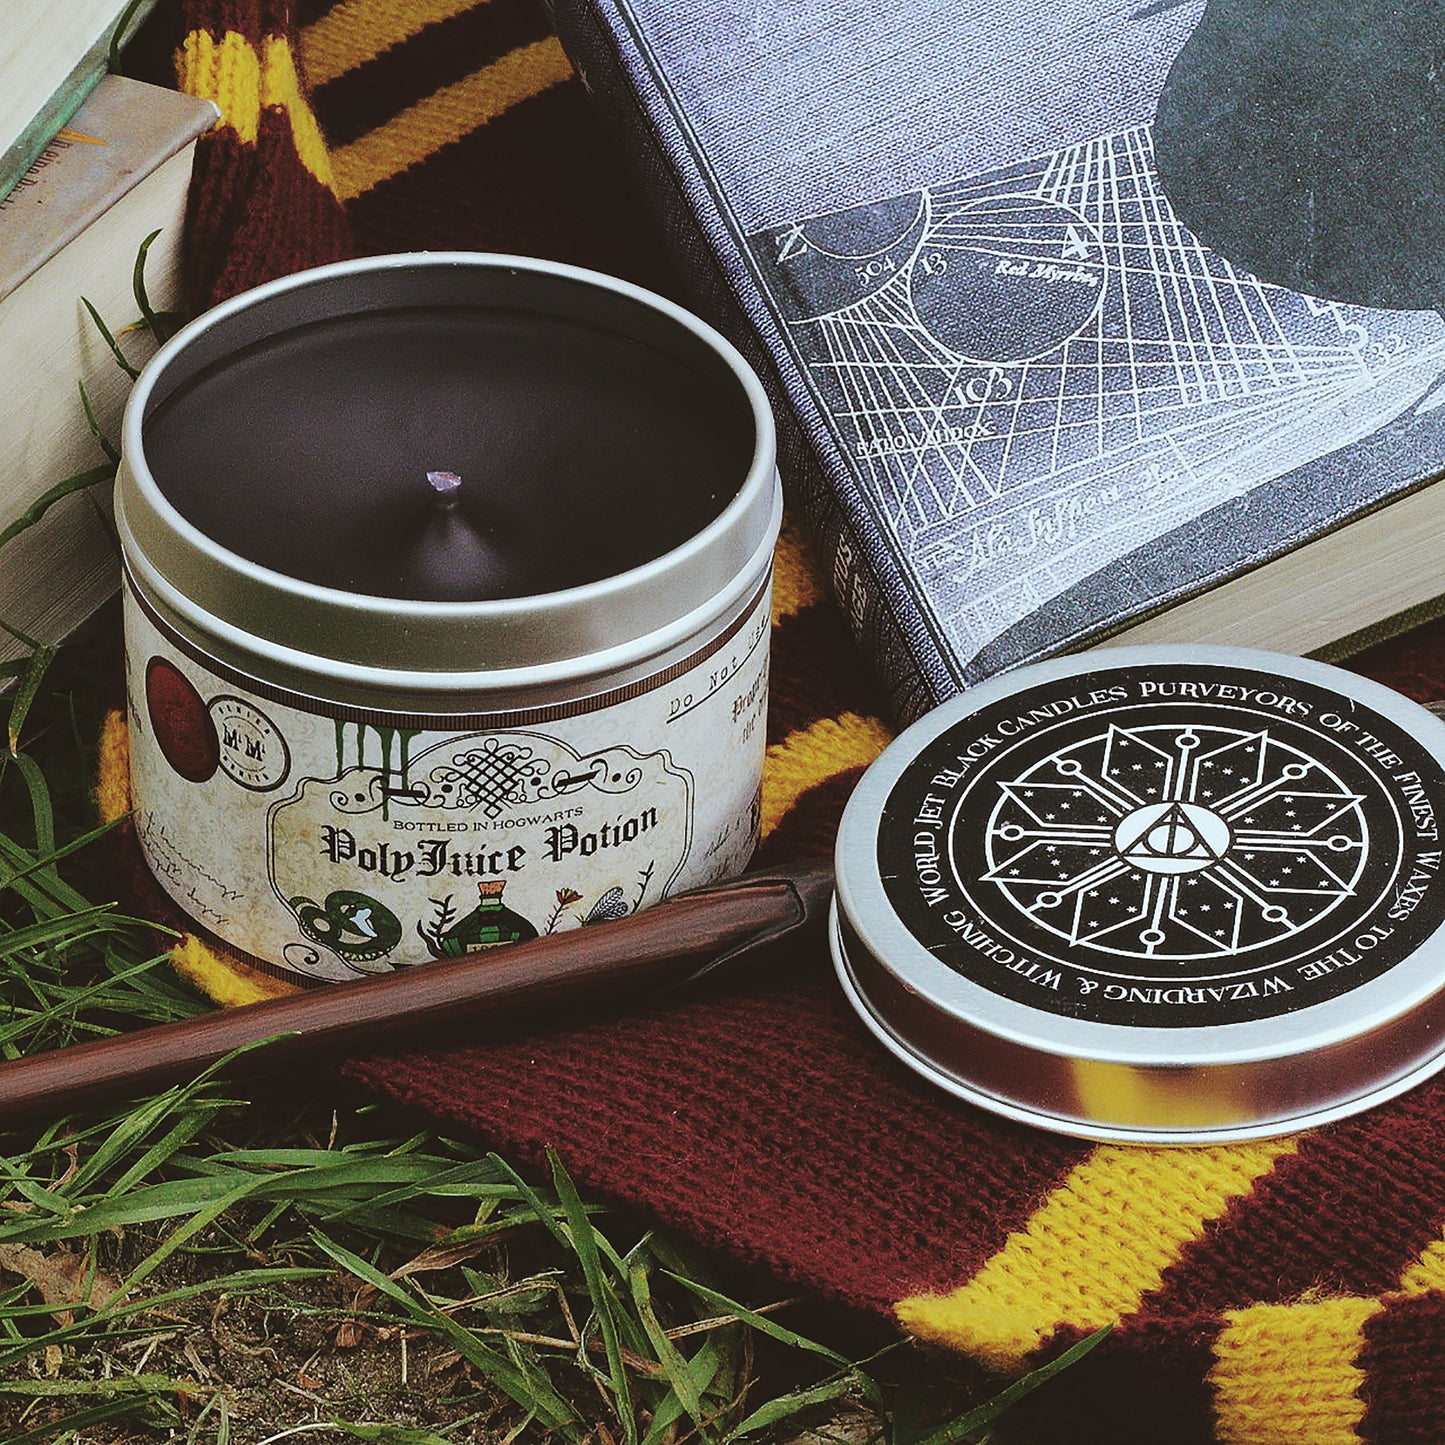 Polyjuice potion scented candle with lid off and black wax.